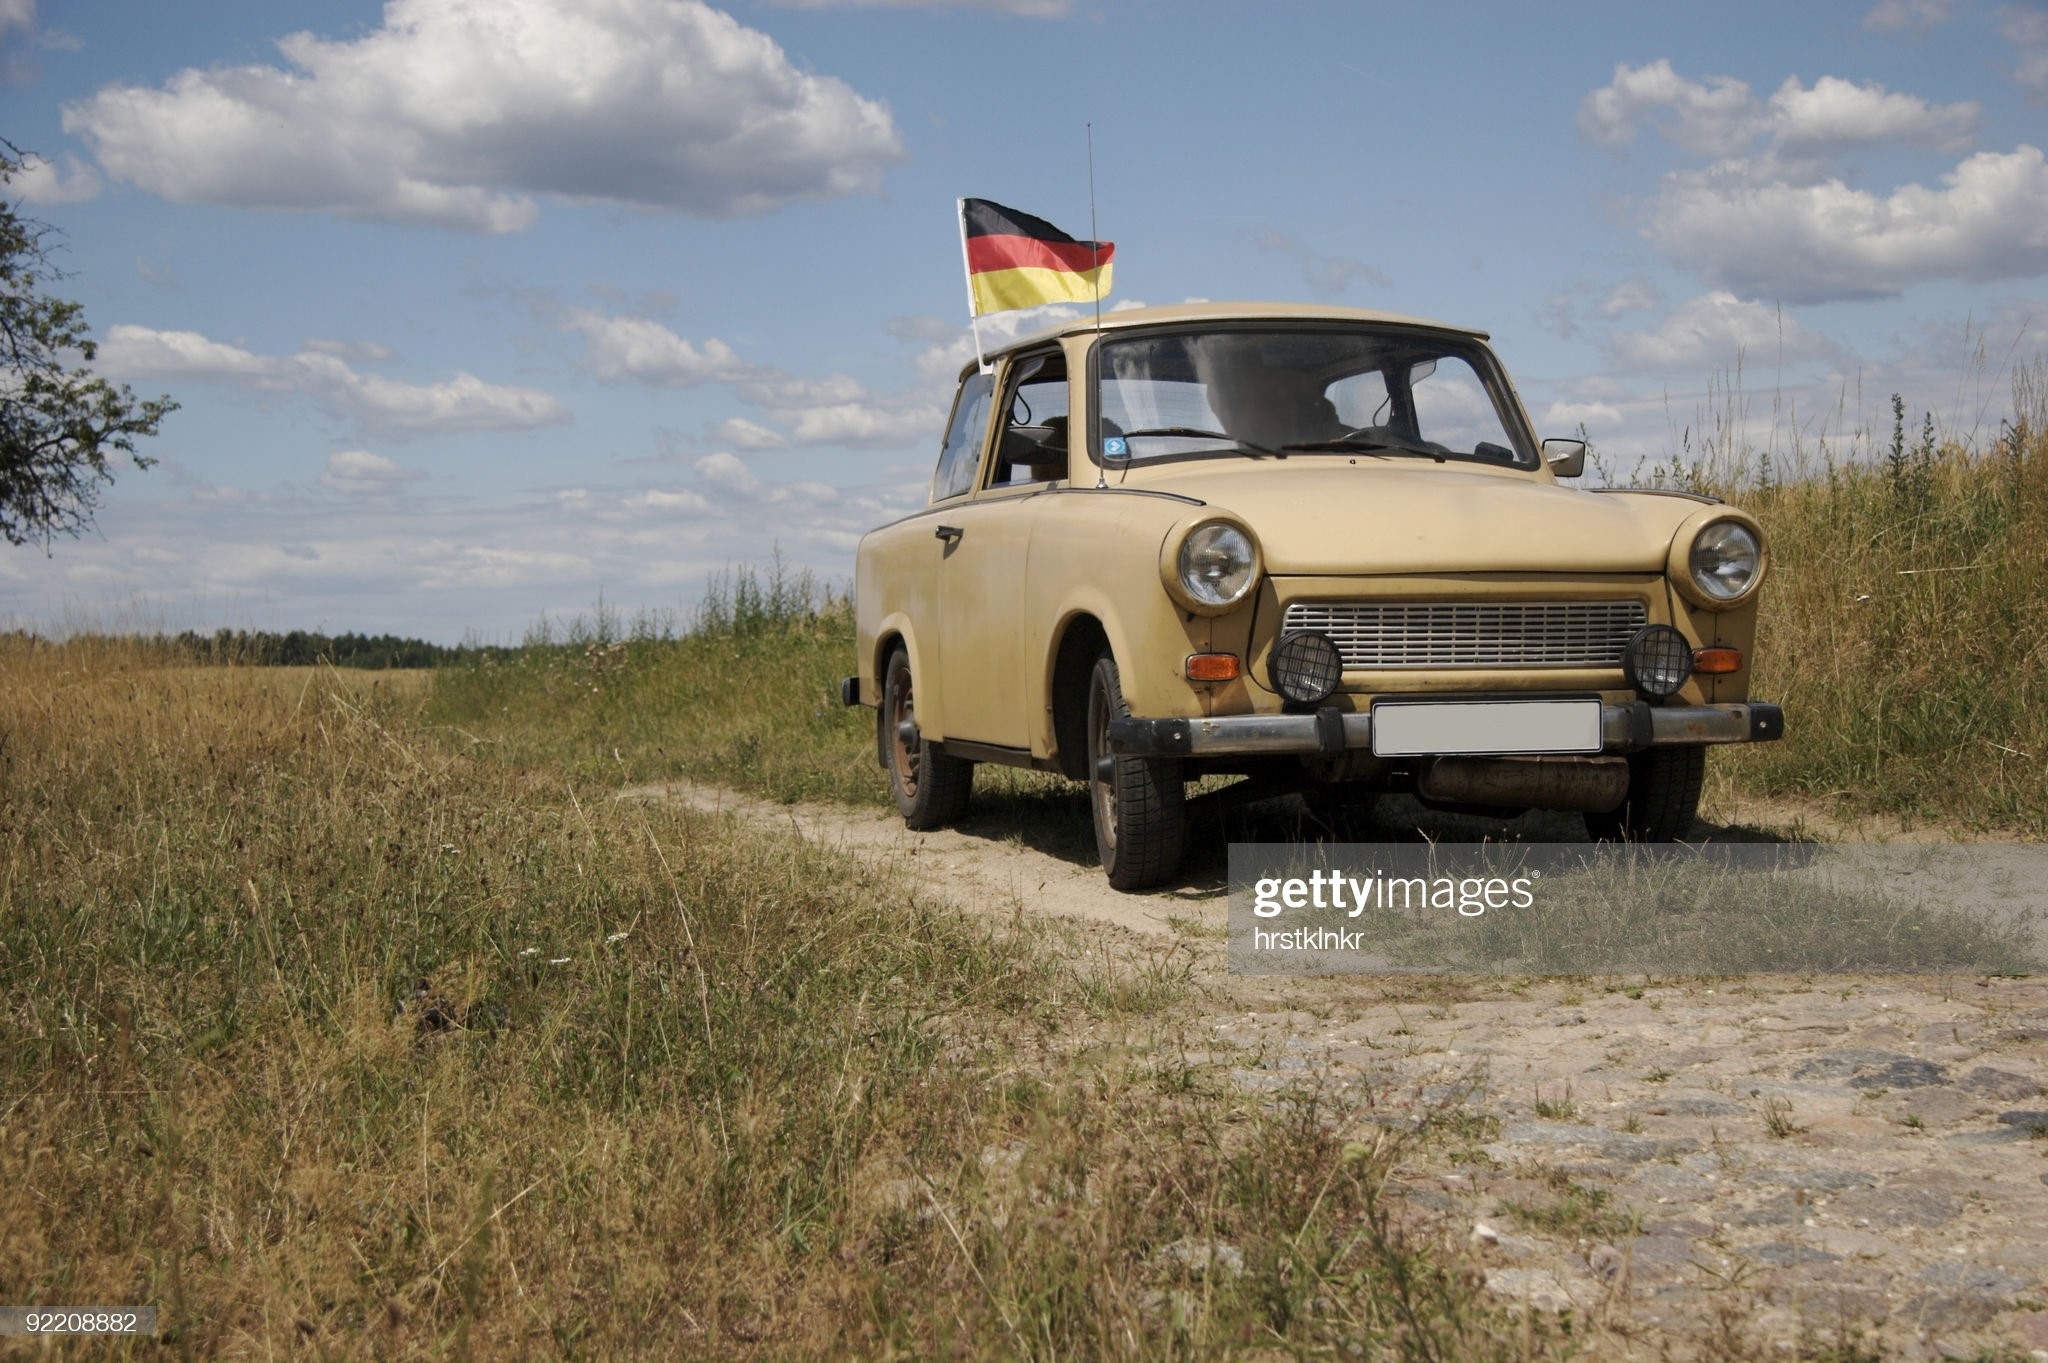 A Trabant, car from GDR, built in 1986.